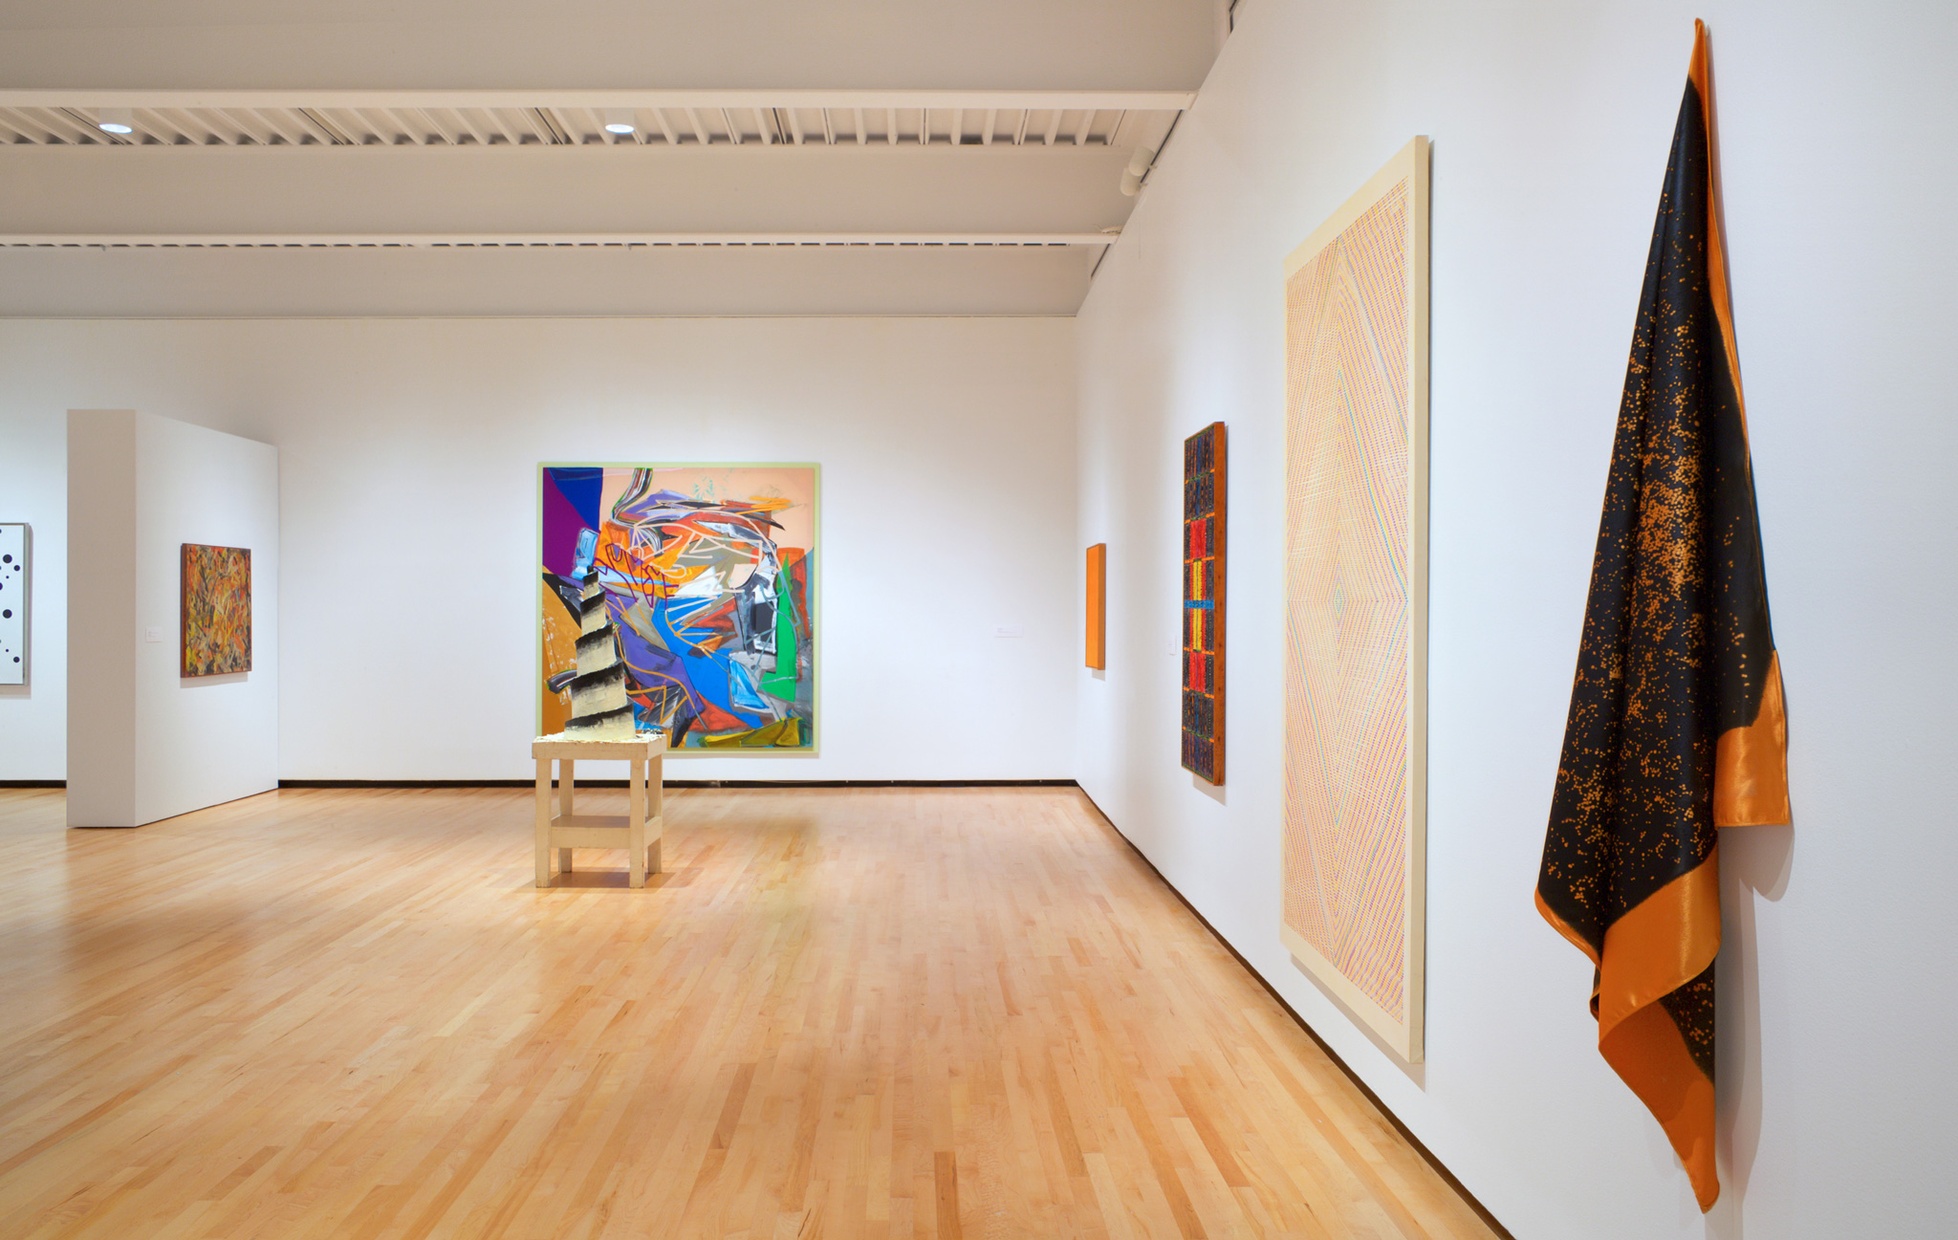 Artworks with bright, warm colors hang on white walls of a large room with a sculpture in the center of the warm wood floors.